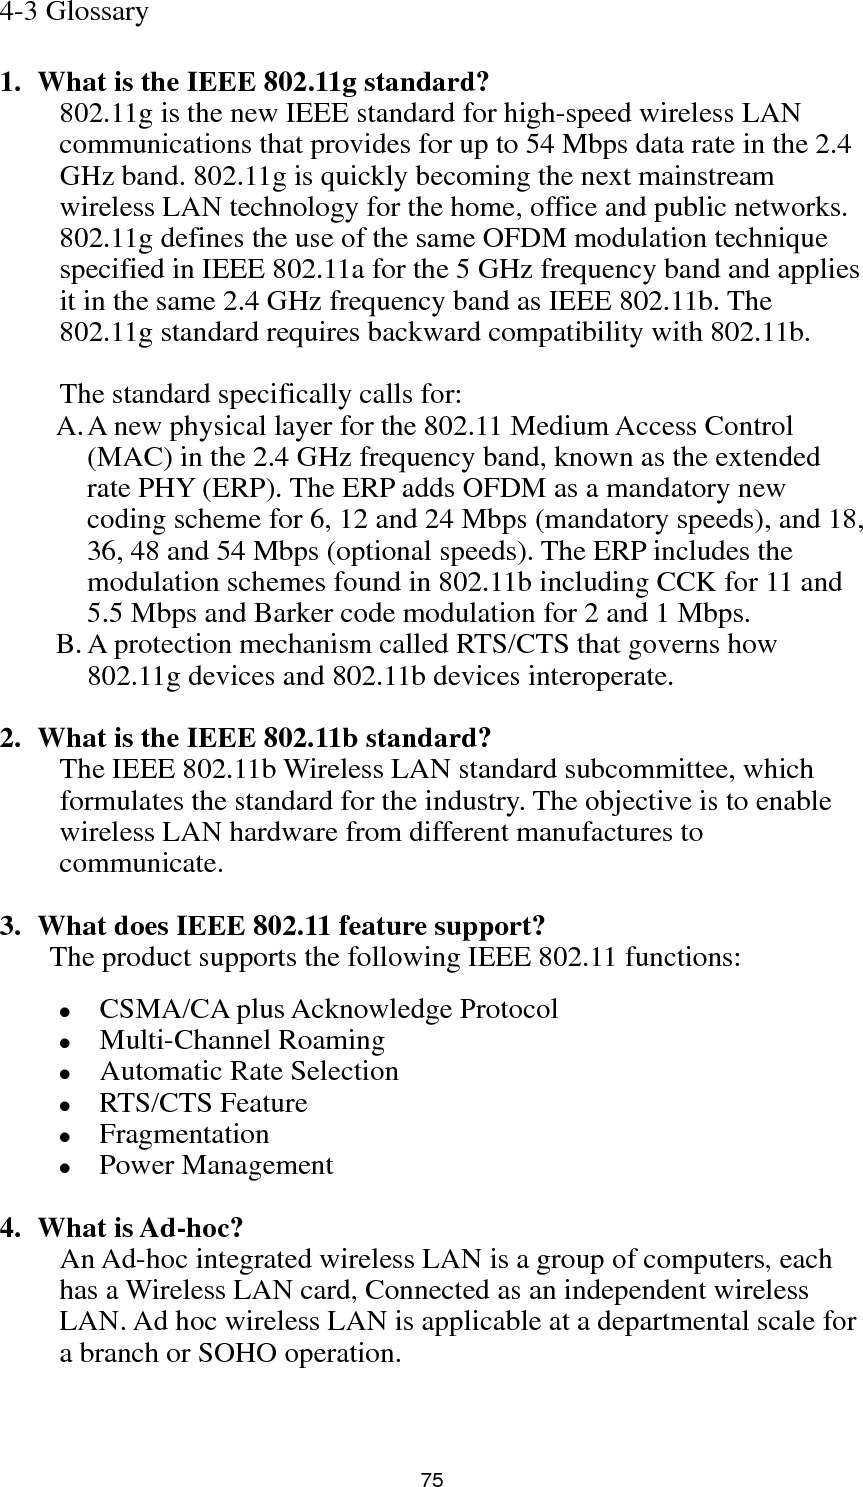  75 4-3 Glossary  1. What is the IEEE 802.11g standard? 802.11g is the new IEEE standard for high-speed wireless LAN communications that provides for up to 54 Mbps data rate in the 2.4 GHz band. 802.11g is quickly becoming the next mainstream wireless LAN technology for the home, office and public networks.   802.11g defines the use of the same OFDM modulation technique specified in IEEE 802.11a for the 5 GHz frequency band and applies it in the same 2.4 GHz frequency band as IEEE 802.11b. The 802.11g standard requires backward compatibility with 802.11b.  The standard specifically calls for:   A. A new physical layer for the 802.11 Medium Access Control (MAC) in the 2.4 GHz frequency band, known as the extended rate PHY (ERP). The ERP adds OFDM as a mandatory new coding scheme for 6, 12 and 24 Mbps (mandatory speeds), and 18, 36, 48 and 54 Mbps (optional speeds). The ERP includes the modulation schemes found in 802.11b including CCK for 11 and 5.5 Mbps and Barker code modulation for 2 and 1 Mbps. B. A protection mechanism called RTS/CTS that governs how 802.11g devices and 802.11b devices interoperate.  2. What is the IEEE 802.11b standard? The IEEE 802.11b Wireless LAN standard subcommittee, which formulates the standard for the industry. The objective is to enable wireless LAN hardware from different manufactures to communicate.  3. What does IEEE 802.11 feature support? The product supports the following IEEE 802.11 functions: z CSMA/CA plus Acknowledge Protocol z Multi-Channel Roaming z Automatic Rate Selection z RTS/CTS Feature z Fragmentation z Power Management  4. What is Ad-hoc? An Ad-hoc integrated wireless LAN is a group of computers, each has a Wireless LAN card, Connected as an independent wireless LAN. Ad hoc wireless LAN is applicable at a departmental scale for a branch or SOHO operation.   